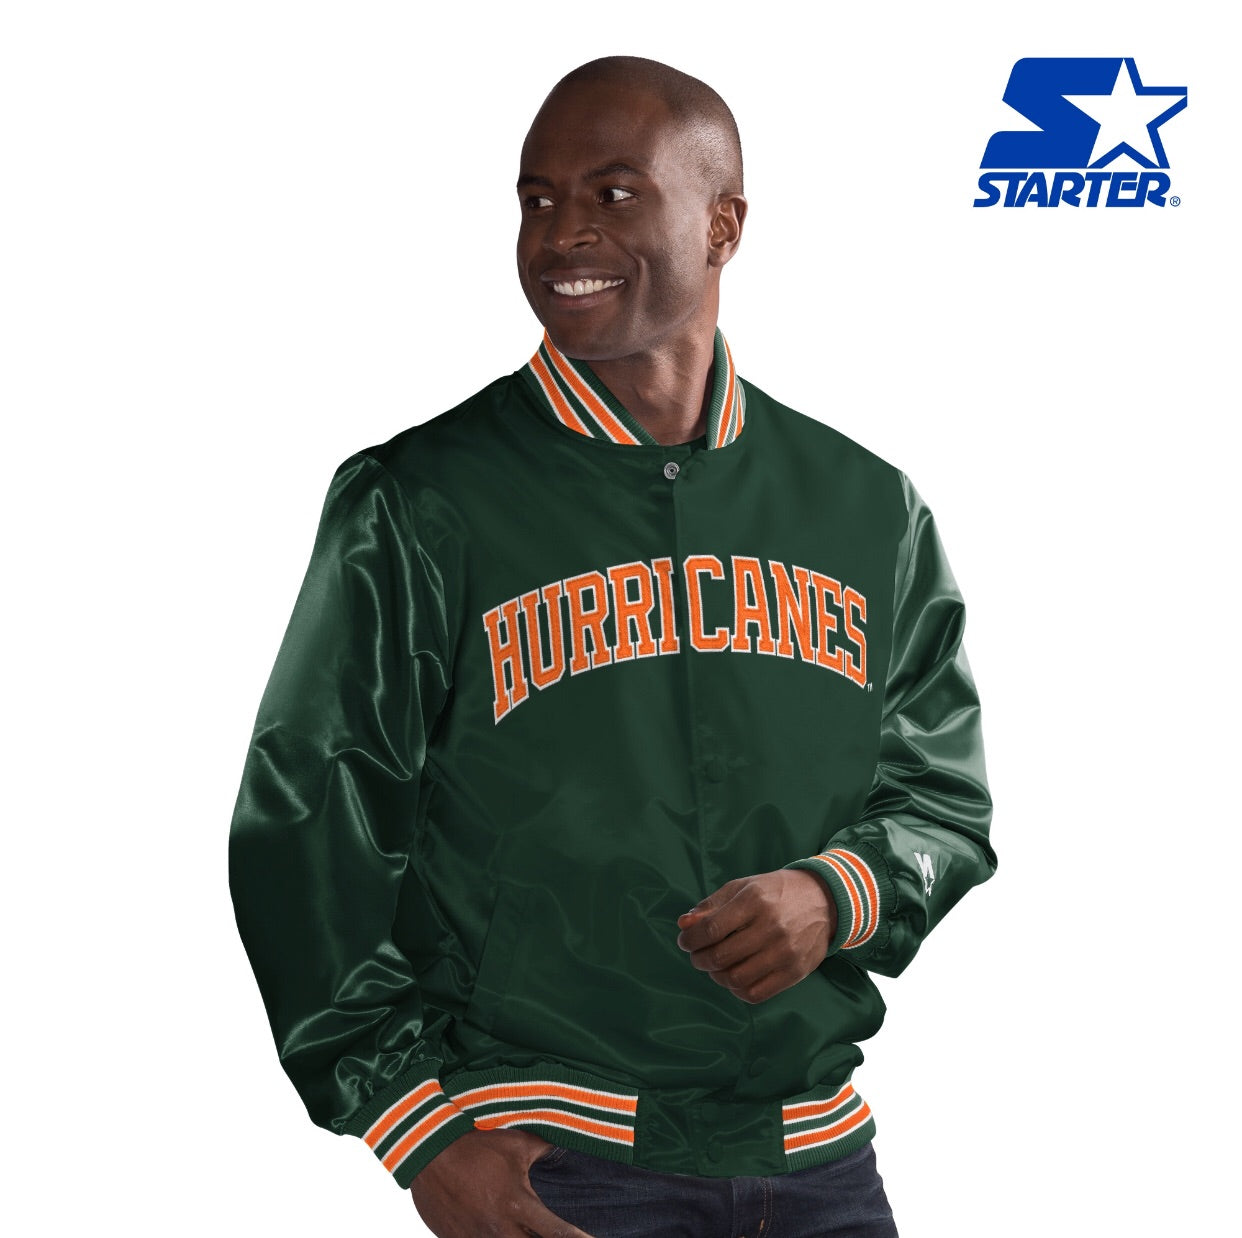 Miami Hurricanes Youth Classic Starter Jacket- Vintage Green